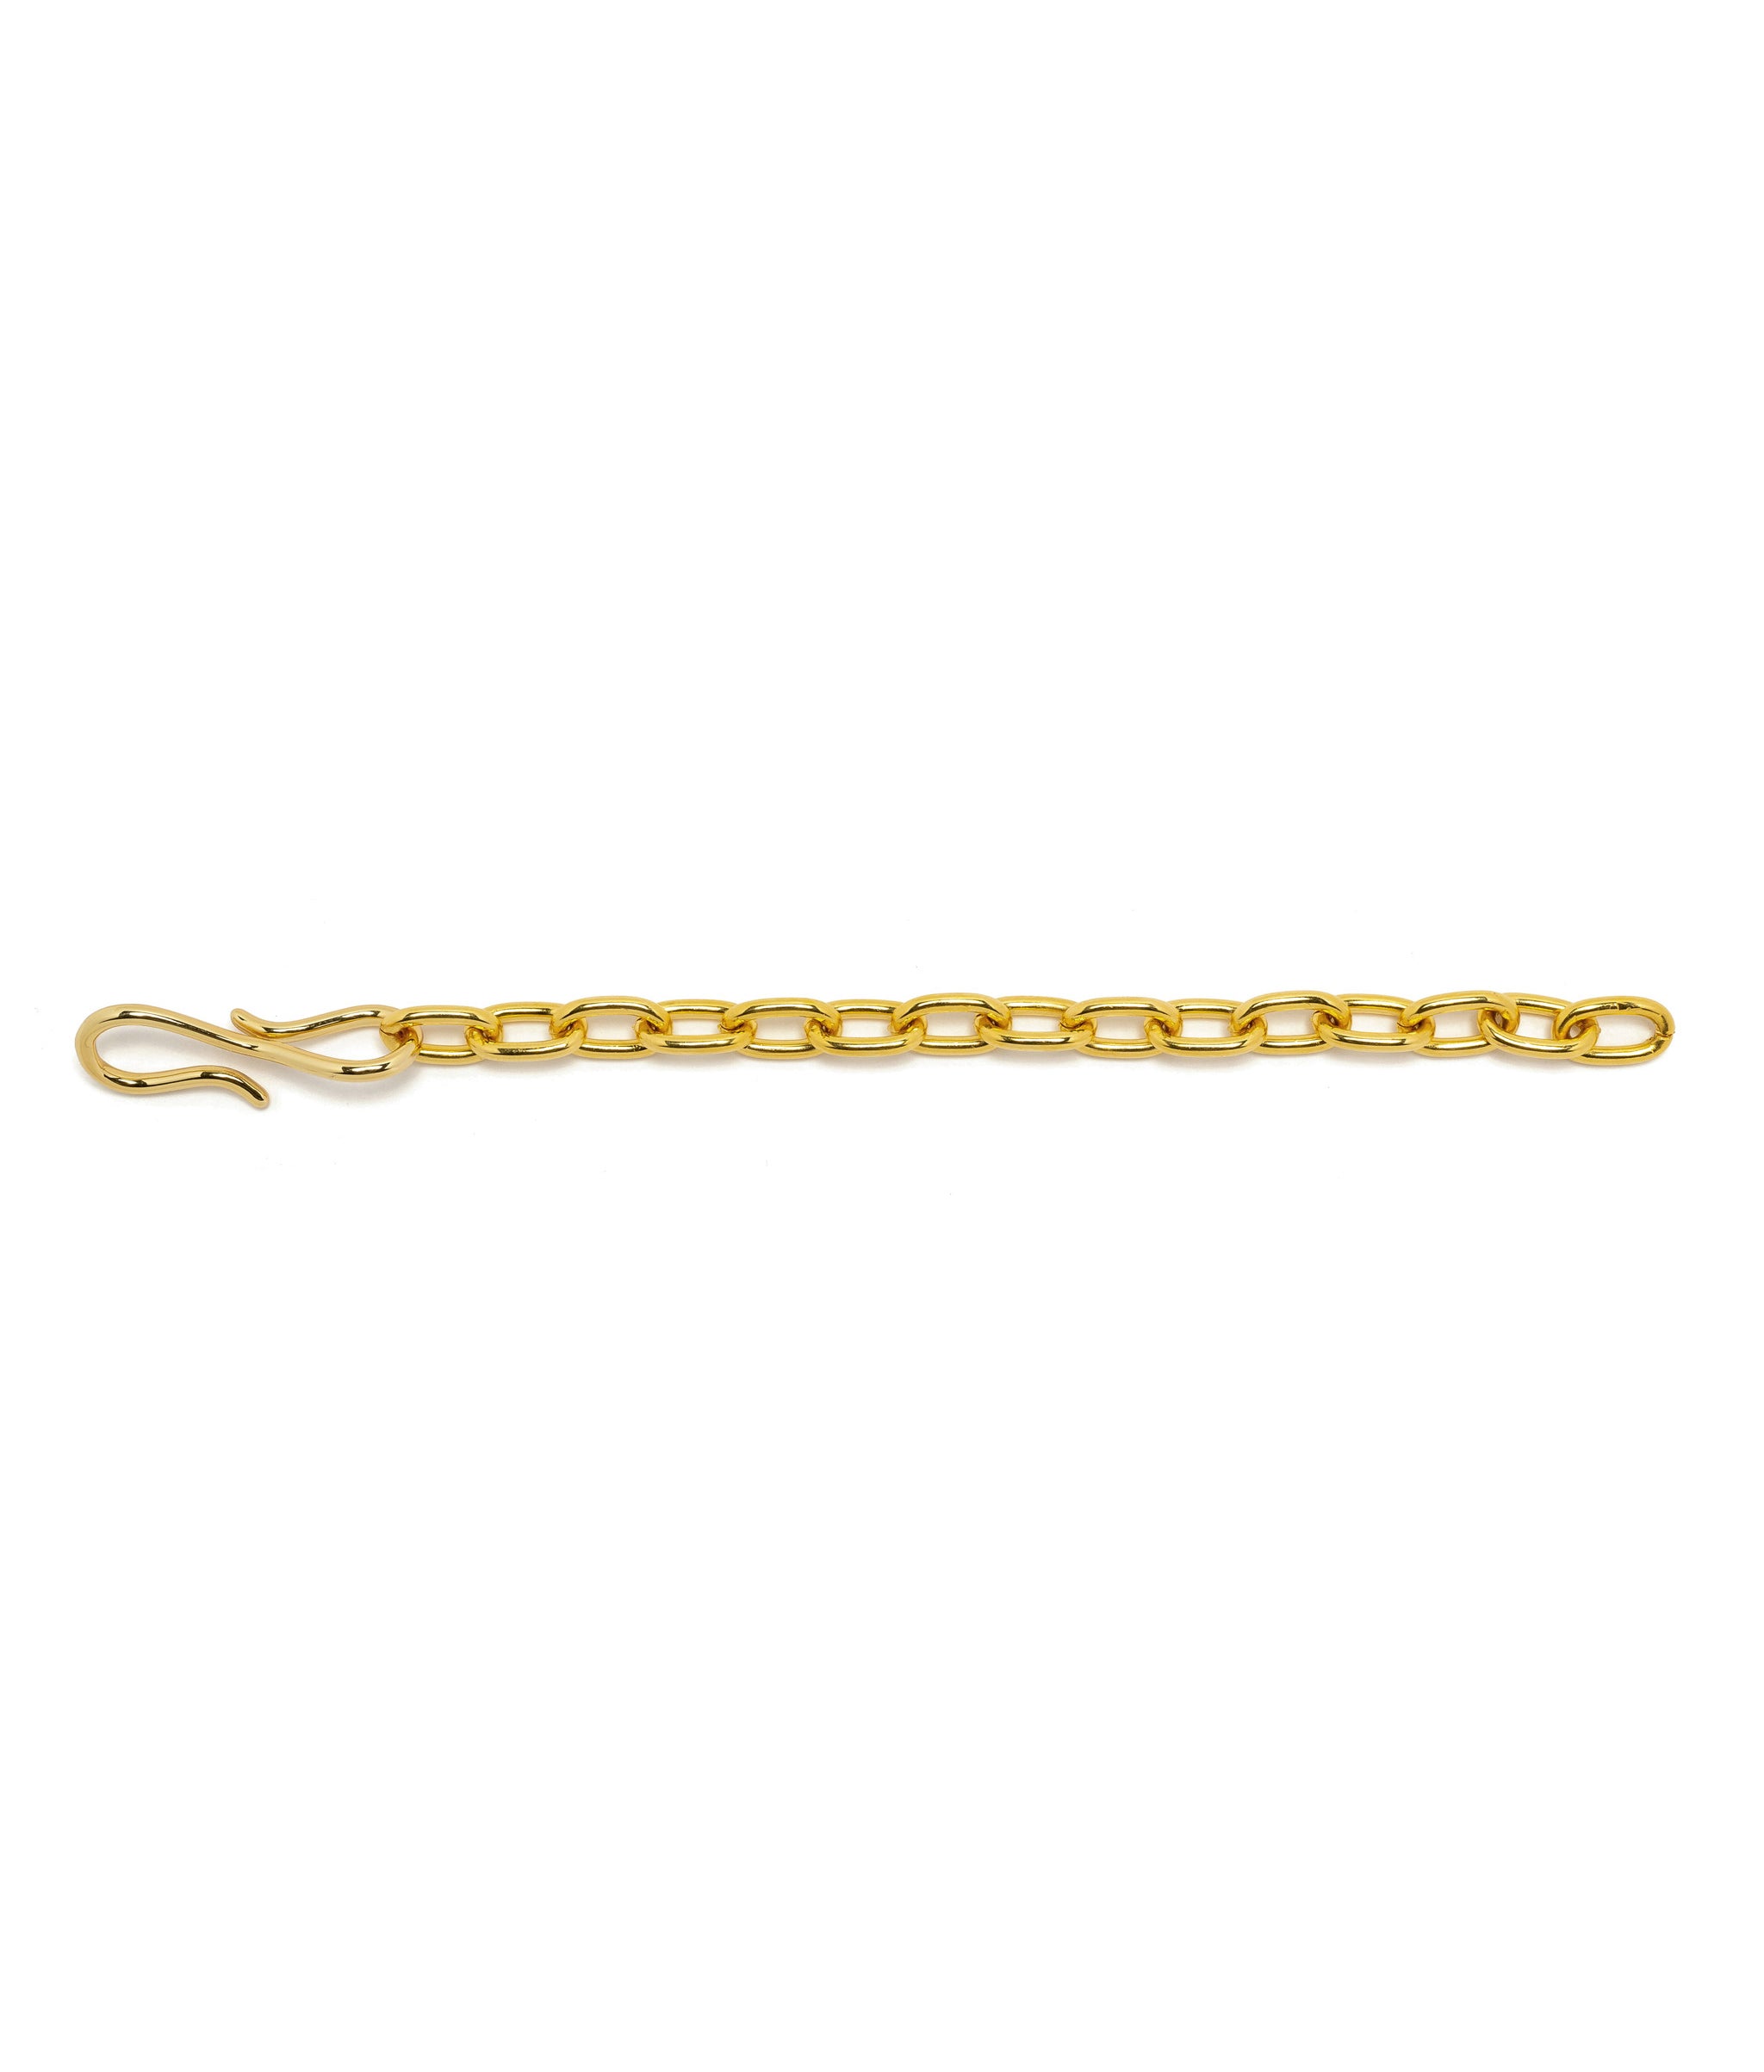 6.5" Gold Extender. Gold-plated brass long link chain with S-hook, to lengthen your Lizzie Fortunato necklaces.